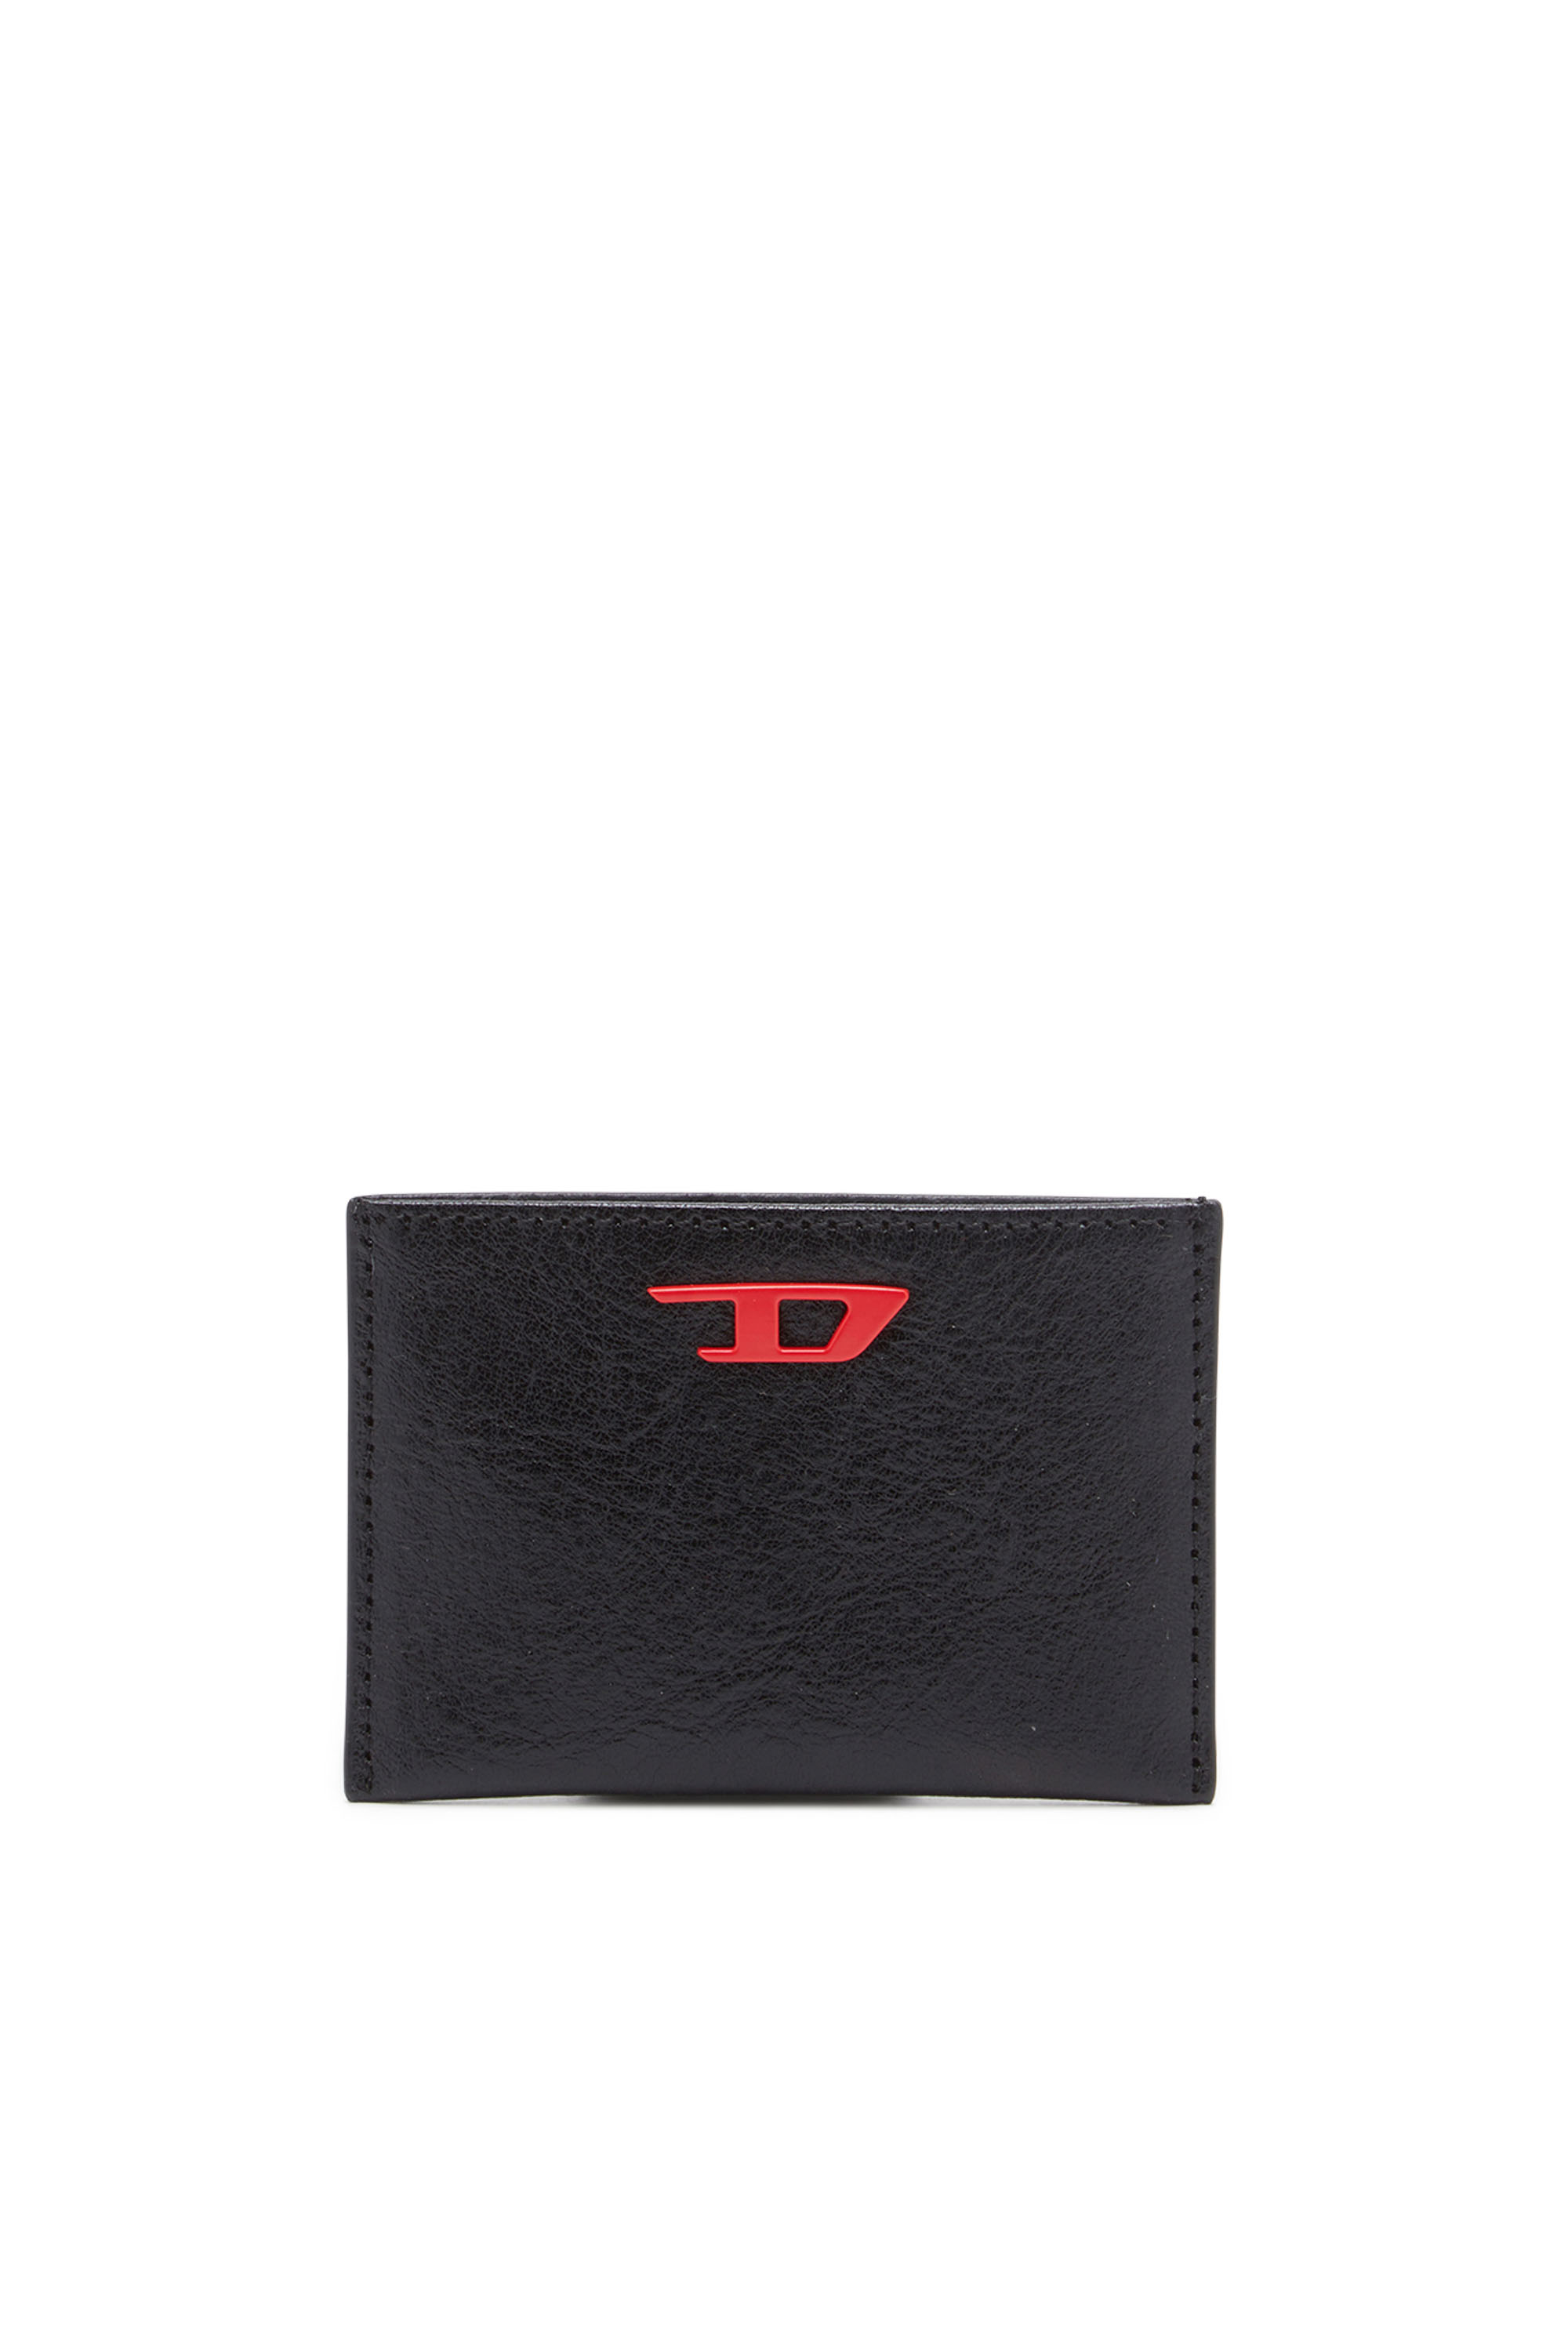 Diesel - Leather bi-fold wallet with red D plaque - Small Wallets - Man - Black